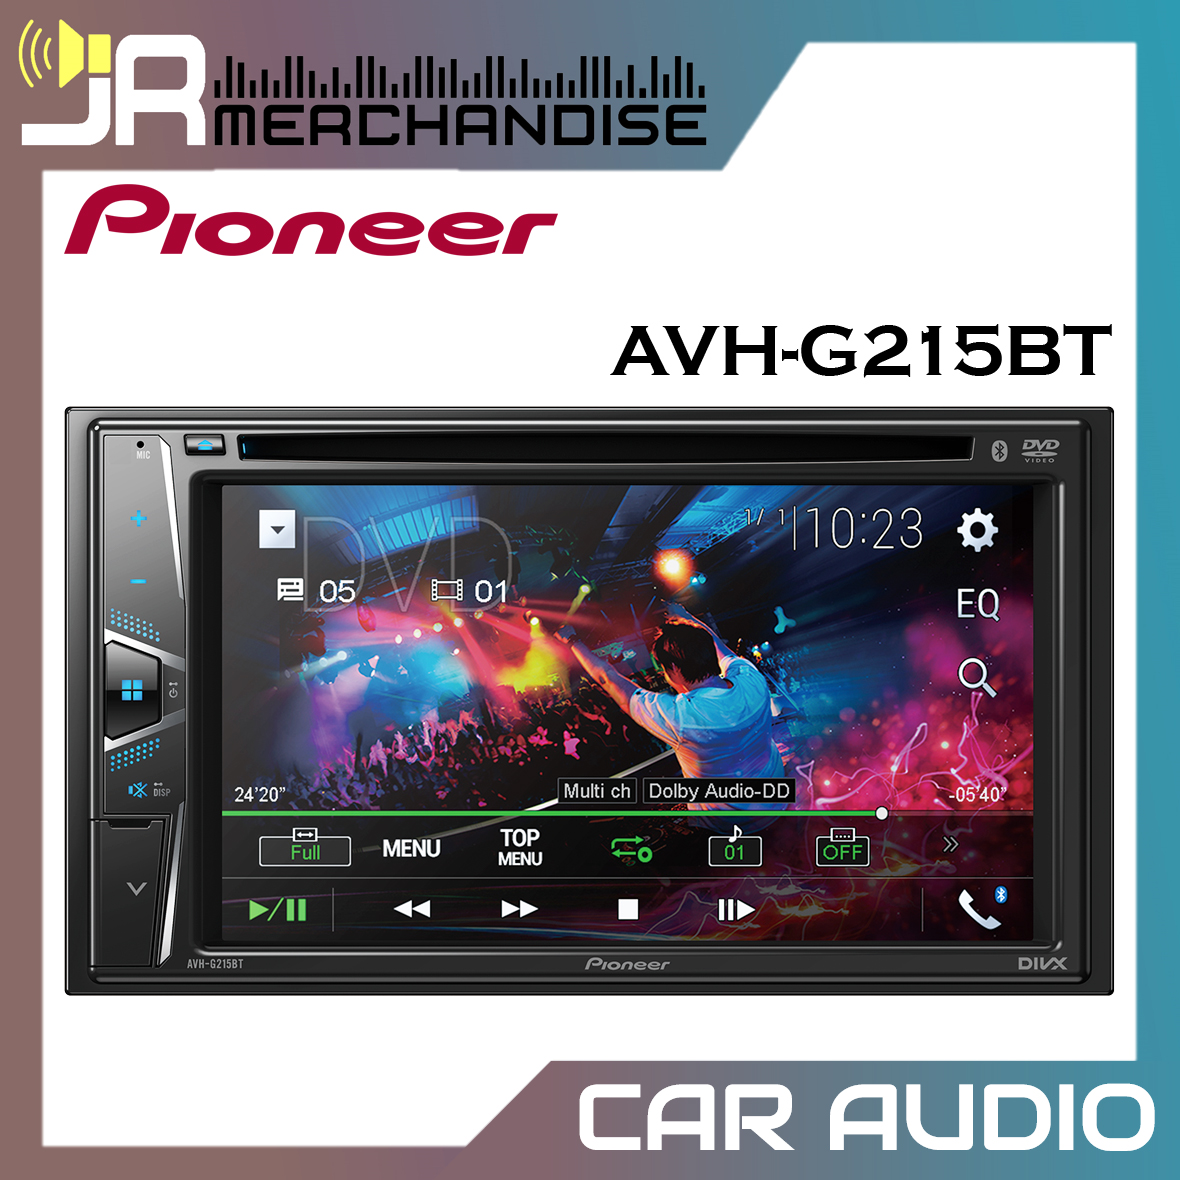 Pioneer (AVH-G215BT) 6.2 In-Dash Din Media Car Stereo Receiver WVGA  Touchscreen Display Lazada PH